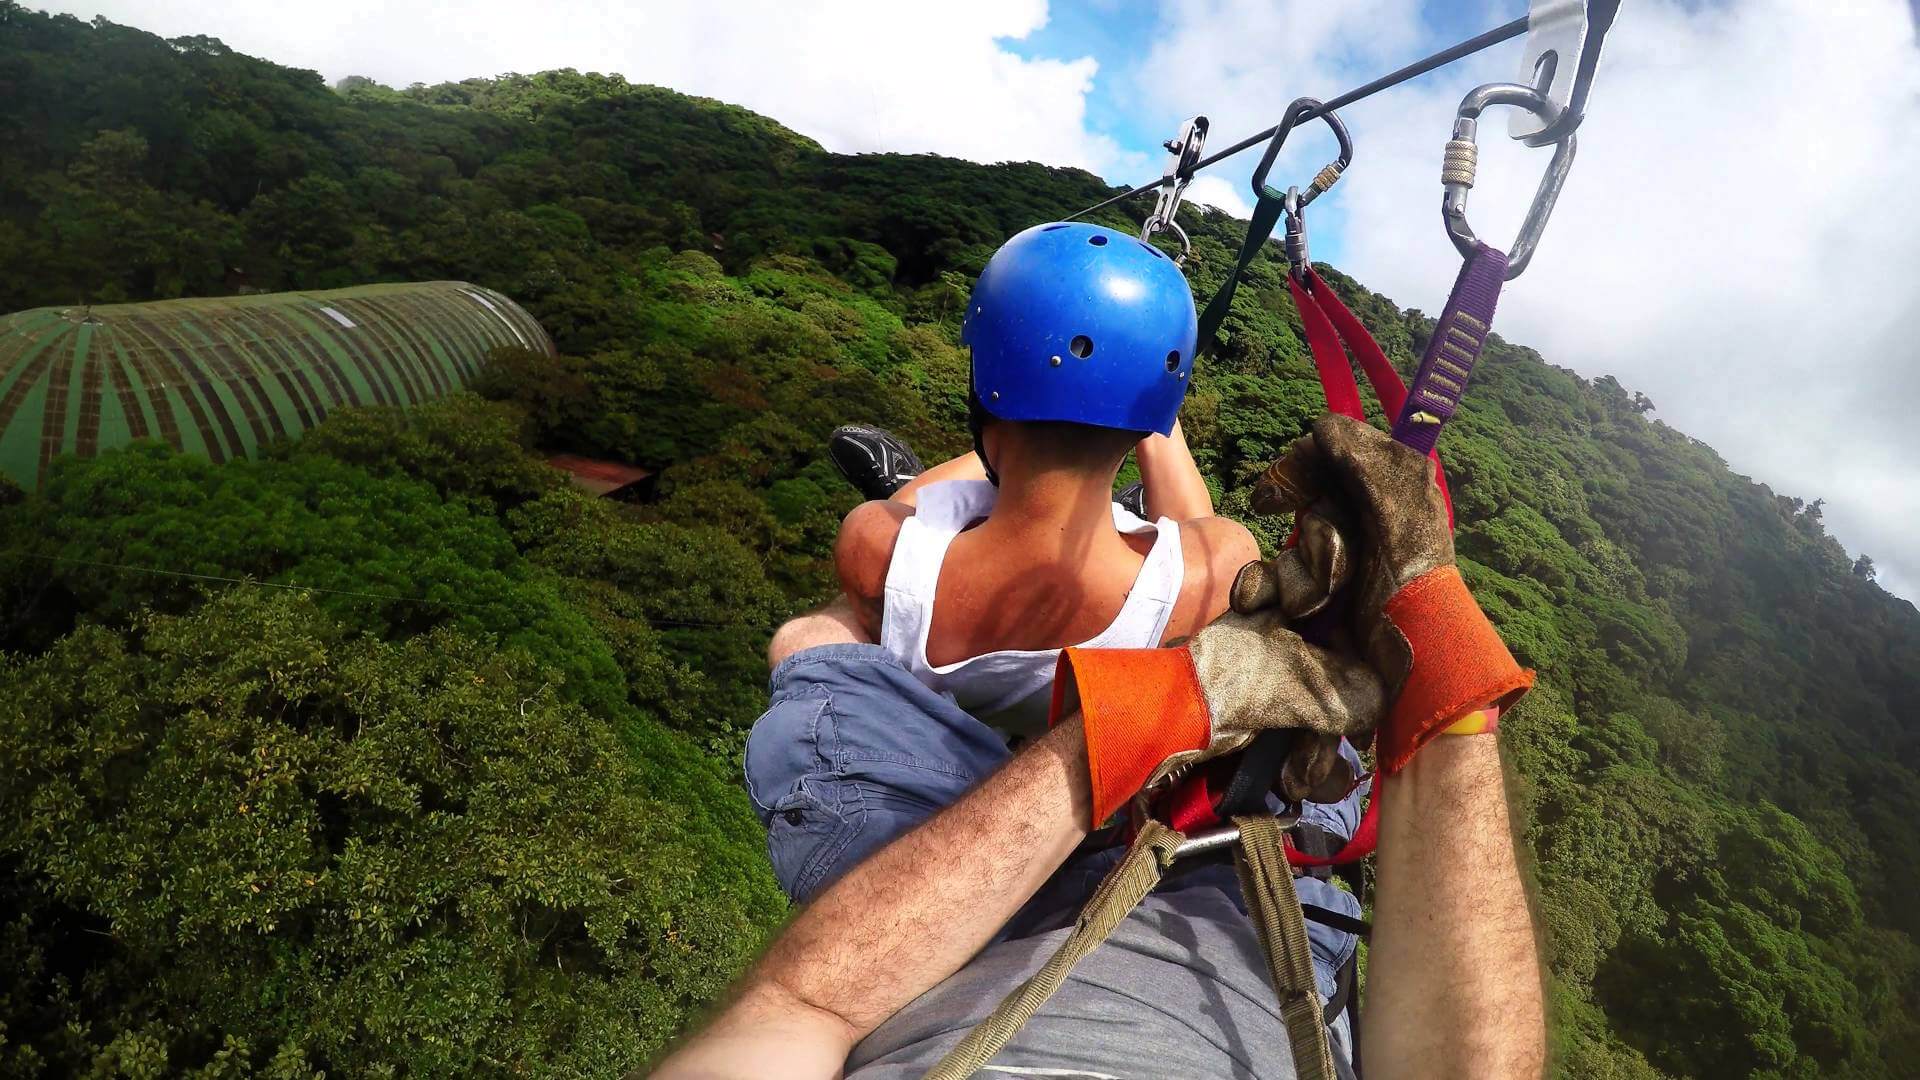 The Selvatura Canopy Tour